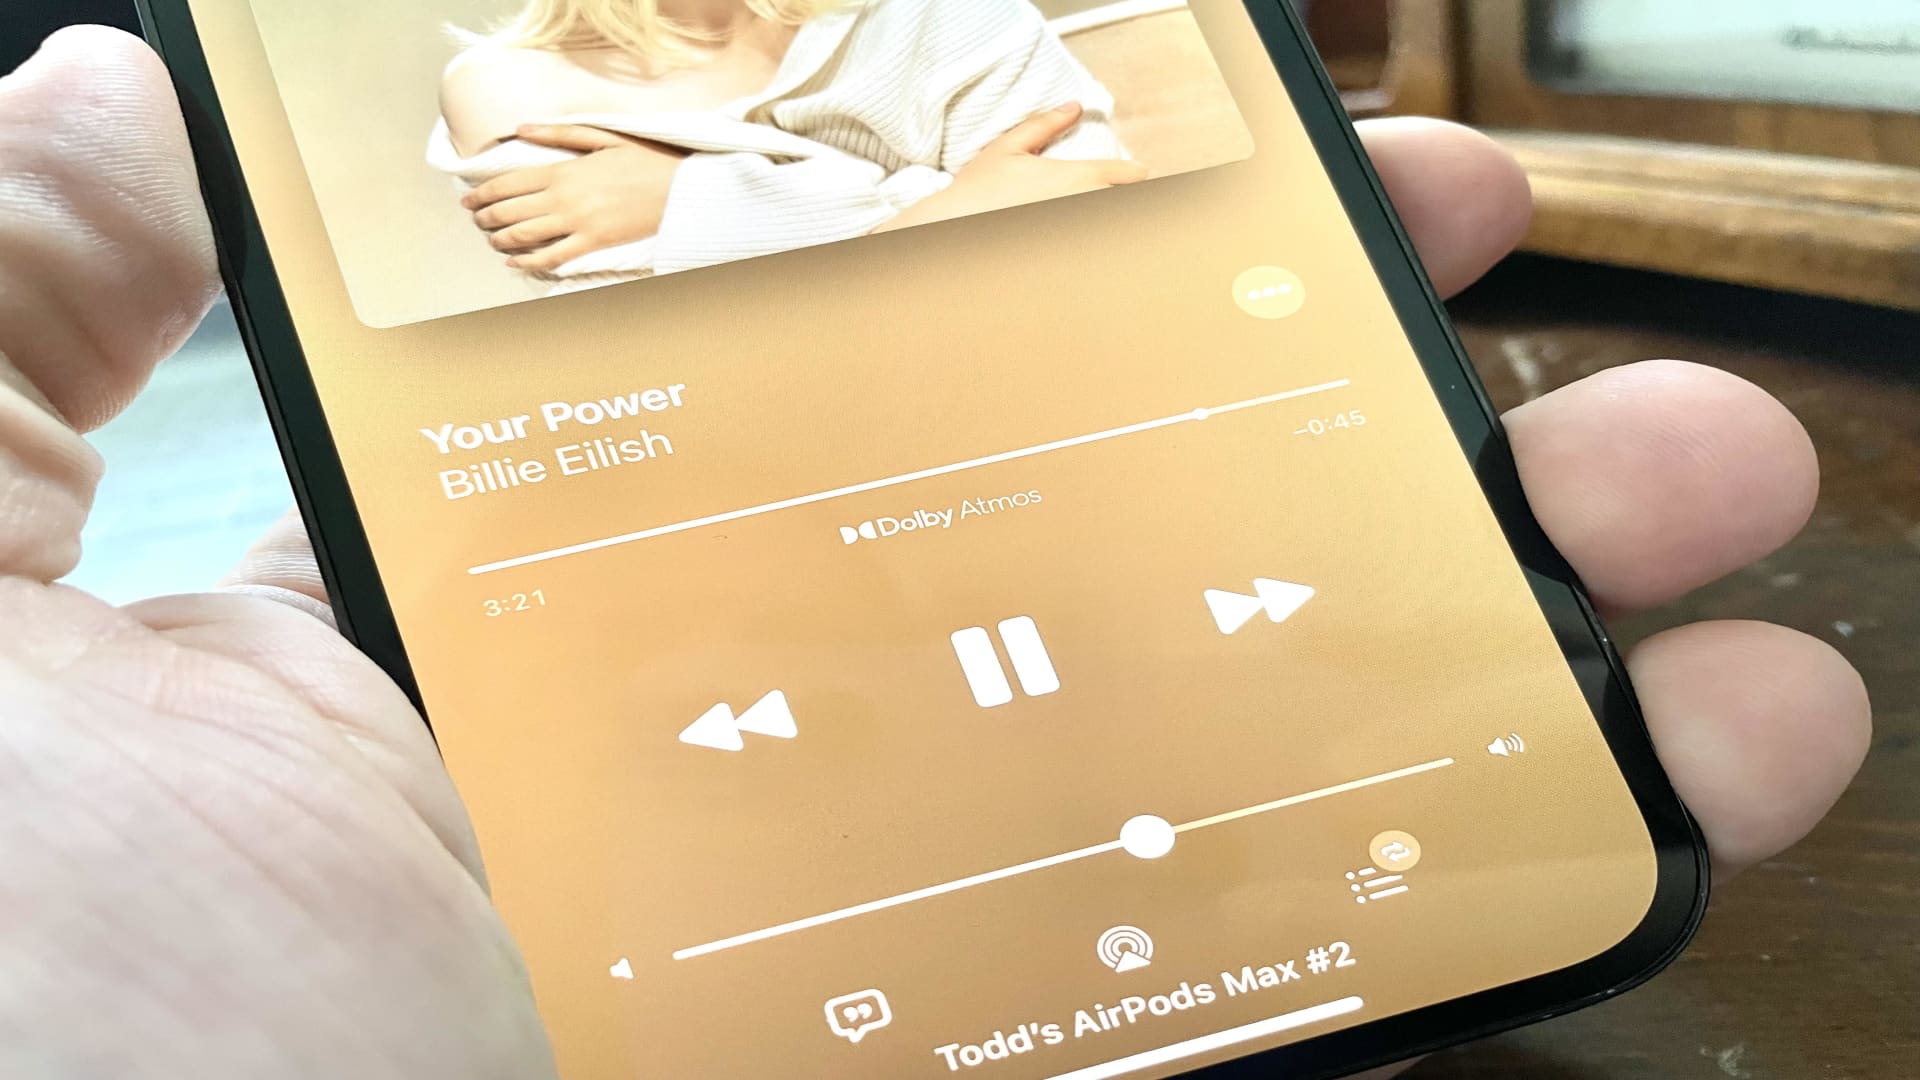 Apple Music with Dolby Atmos spatial sound